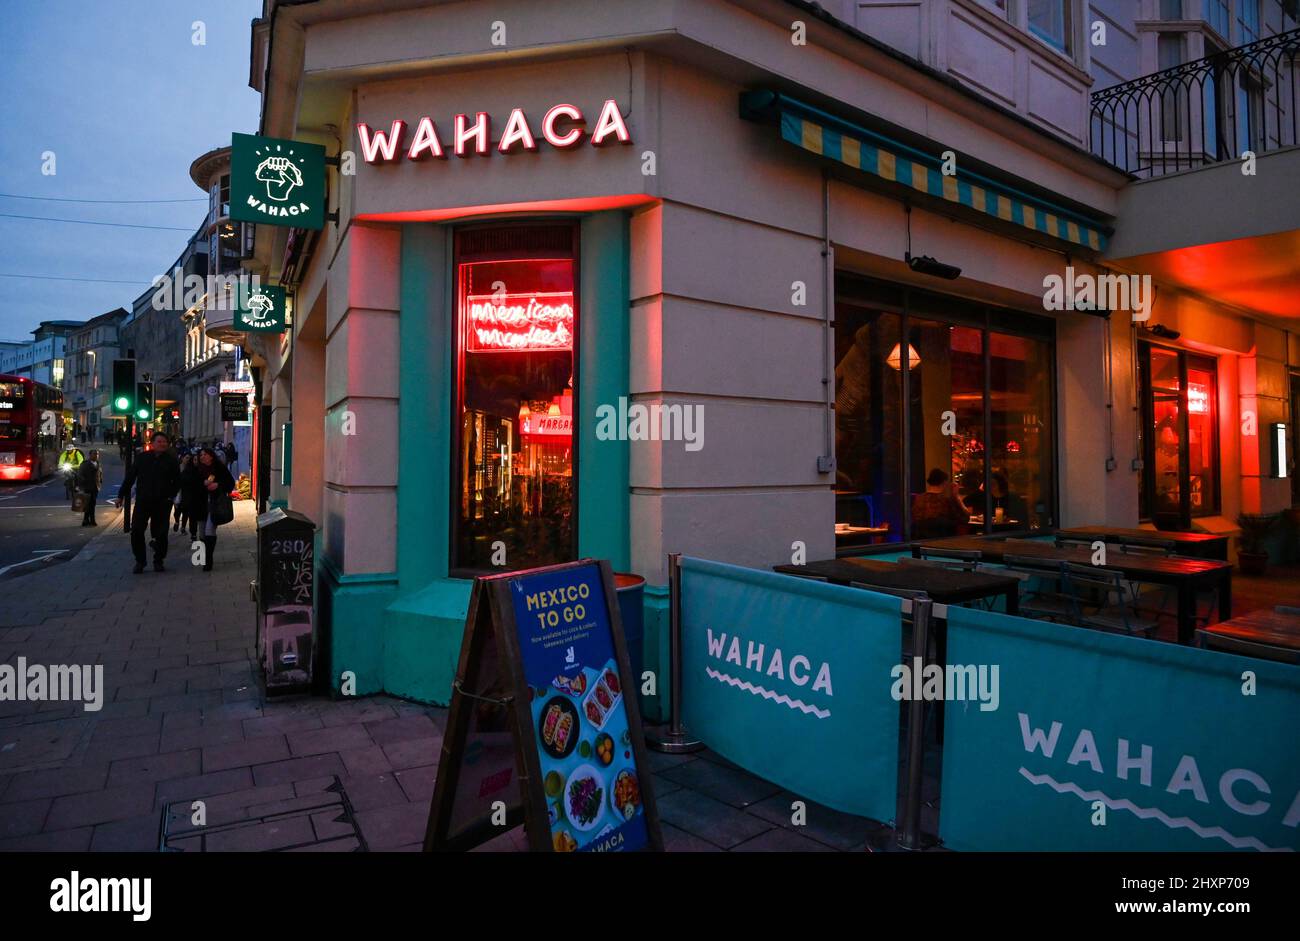 The Wahaca Mexican Street Food restaurant on corner of North Street and New Road Brighton UK Stock Photo